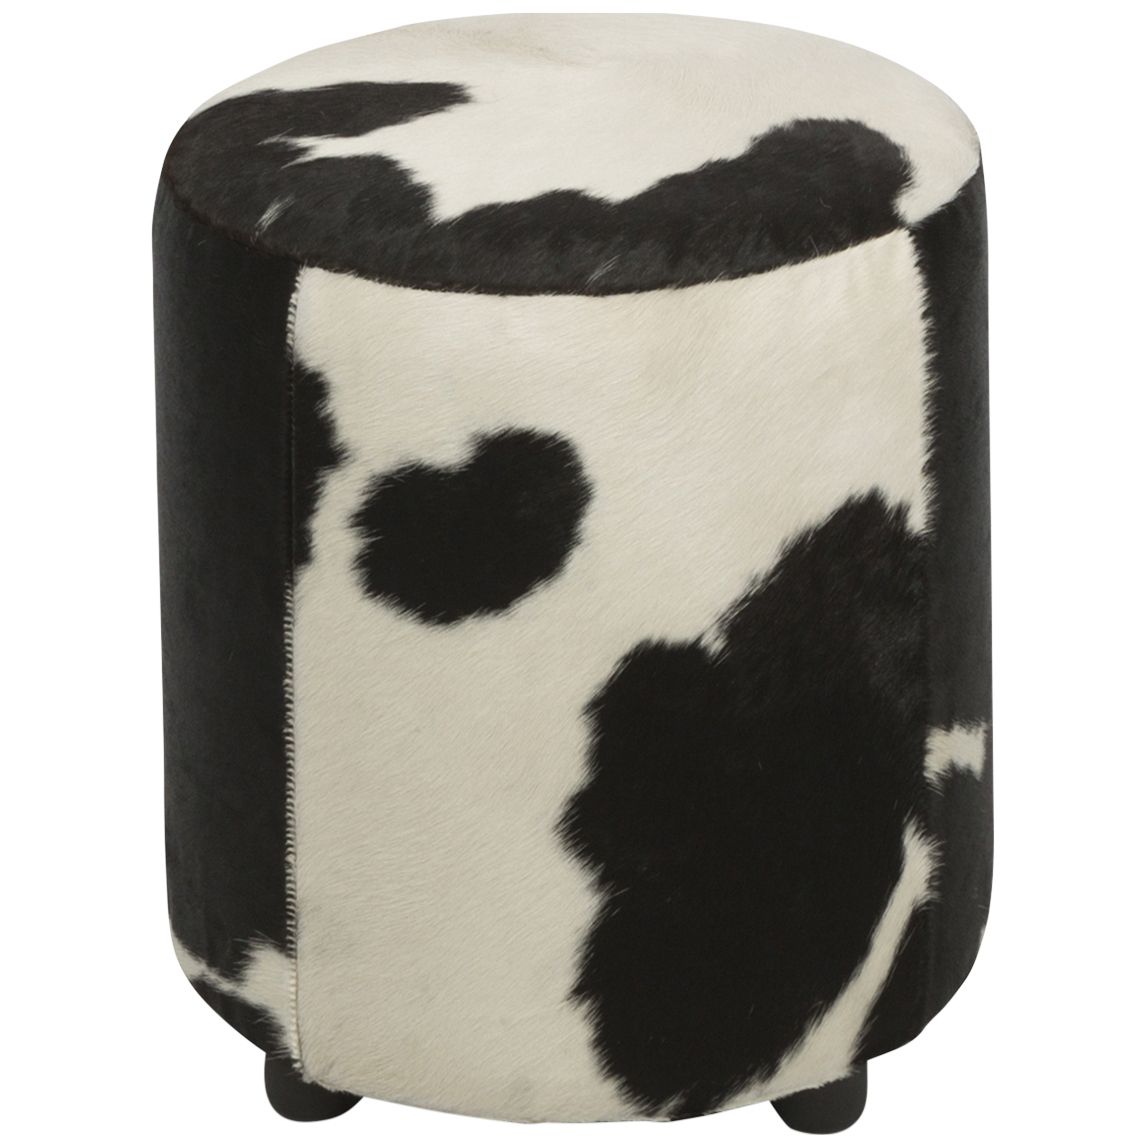 Lifestyle Traders Black & White Round Cowhide Ottoman | Temple & Webster With White Cow Hide Ottomans (View 7 of 15)